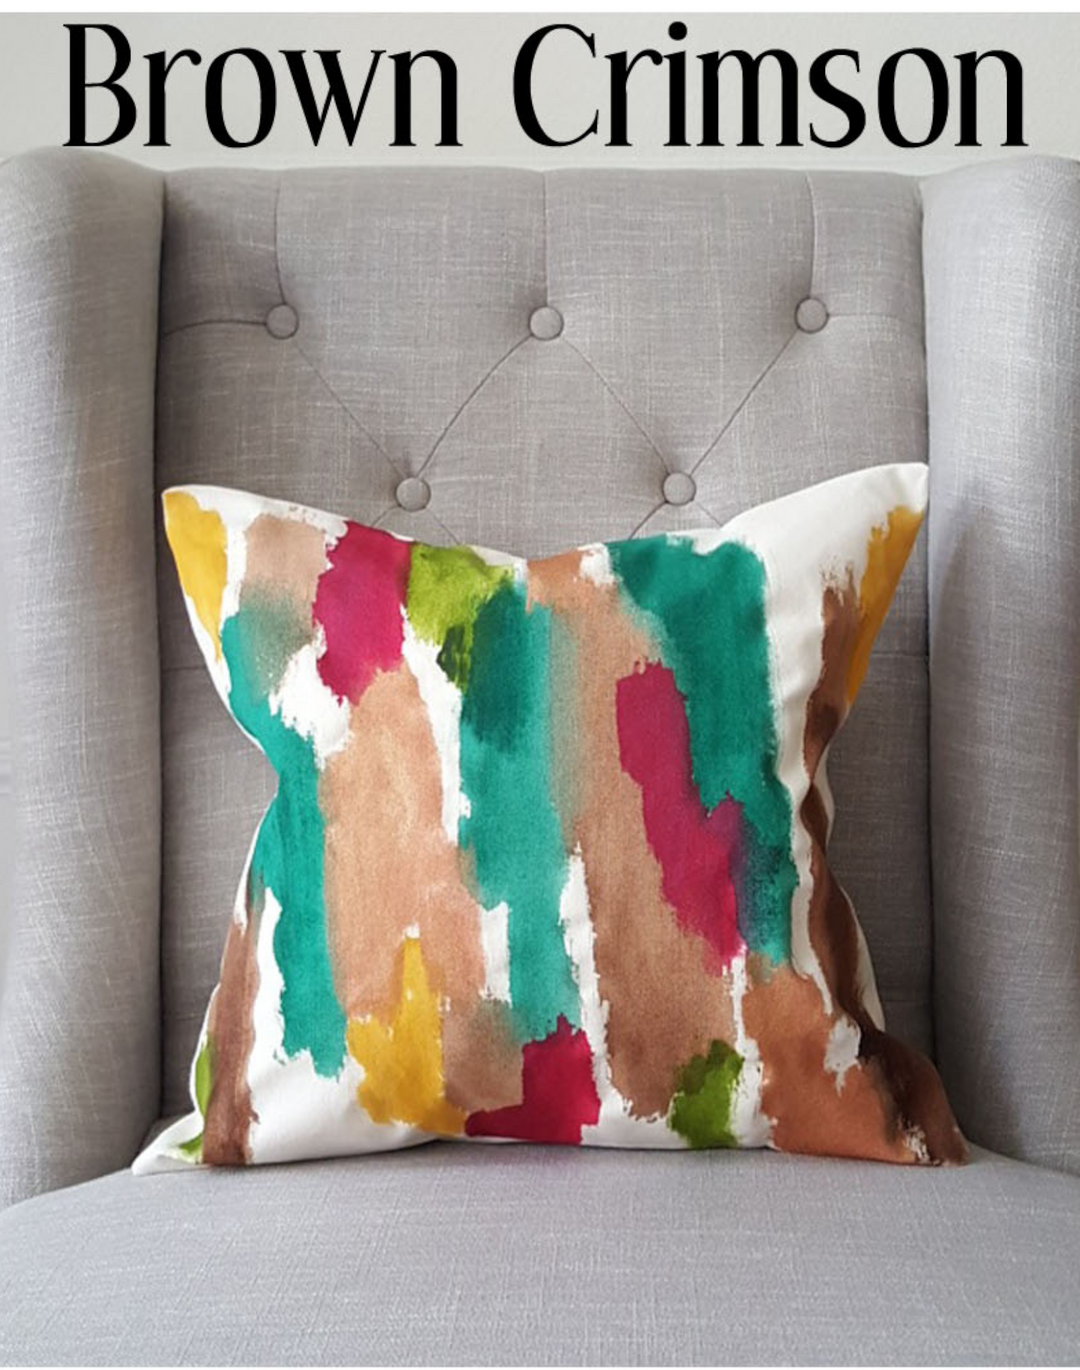 Julie Kay Hand Painted Watercolor Pillow Cover, Brown Crimson